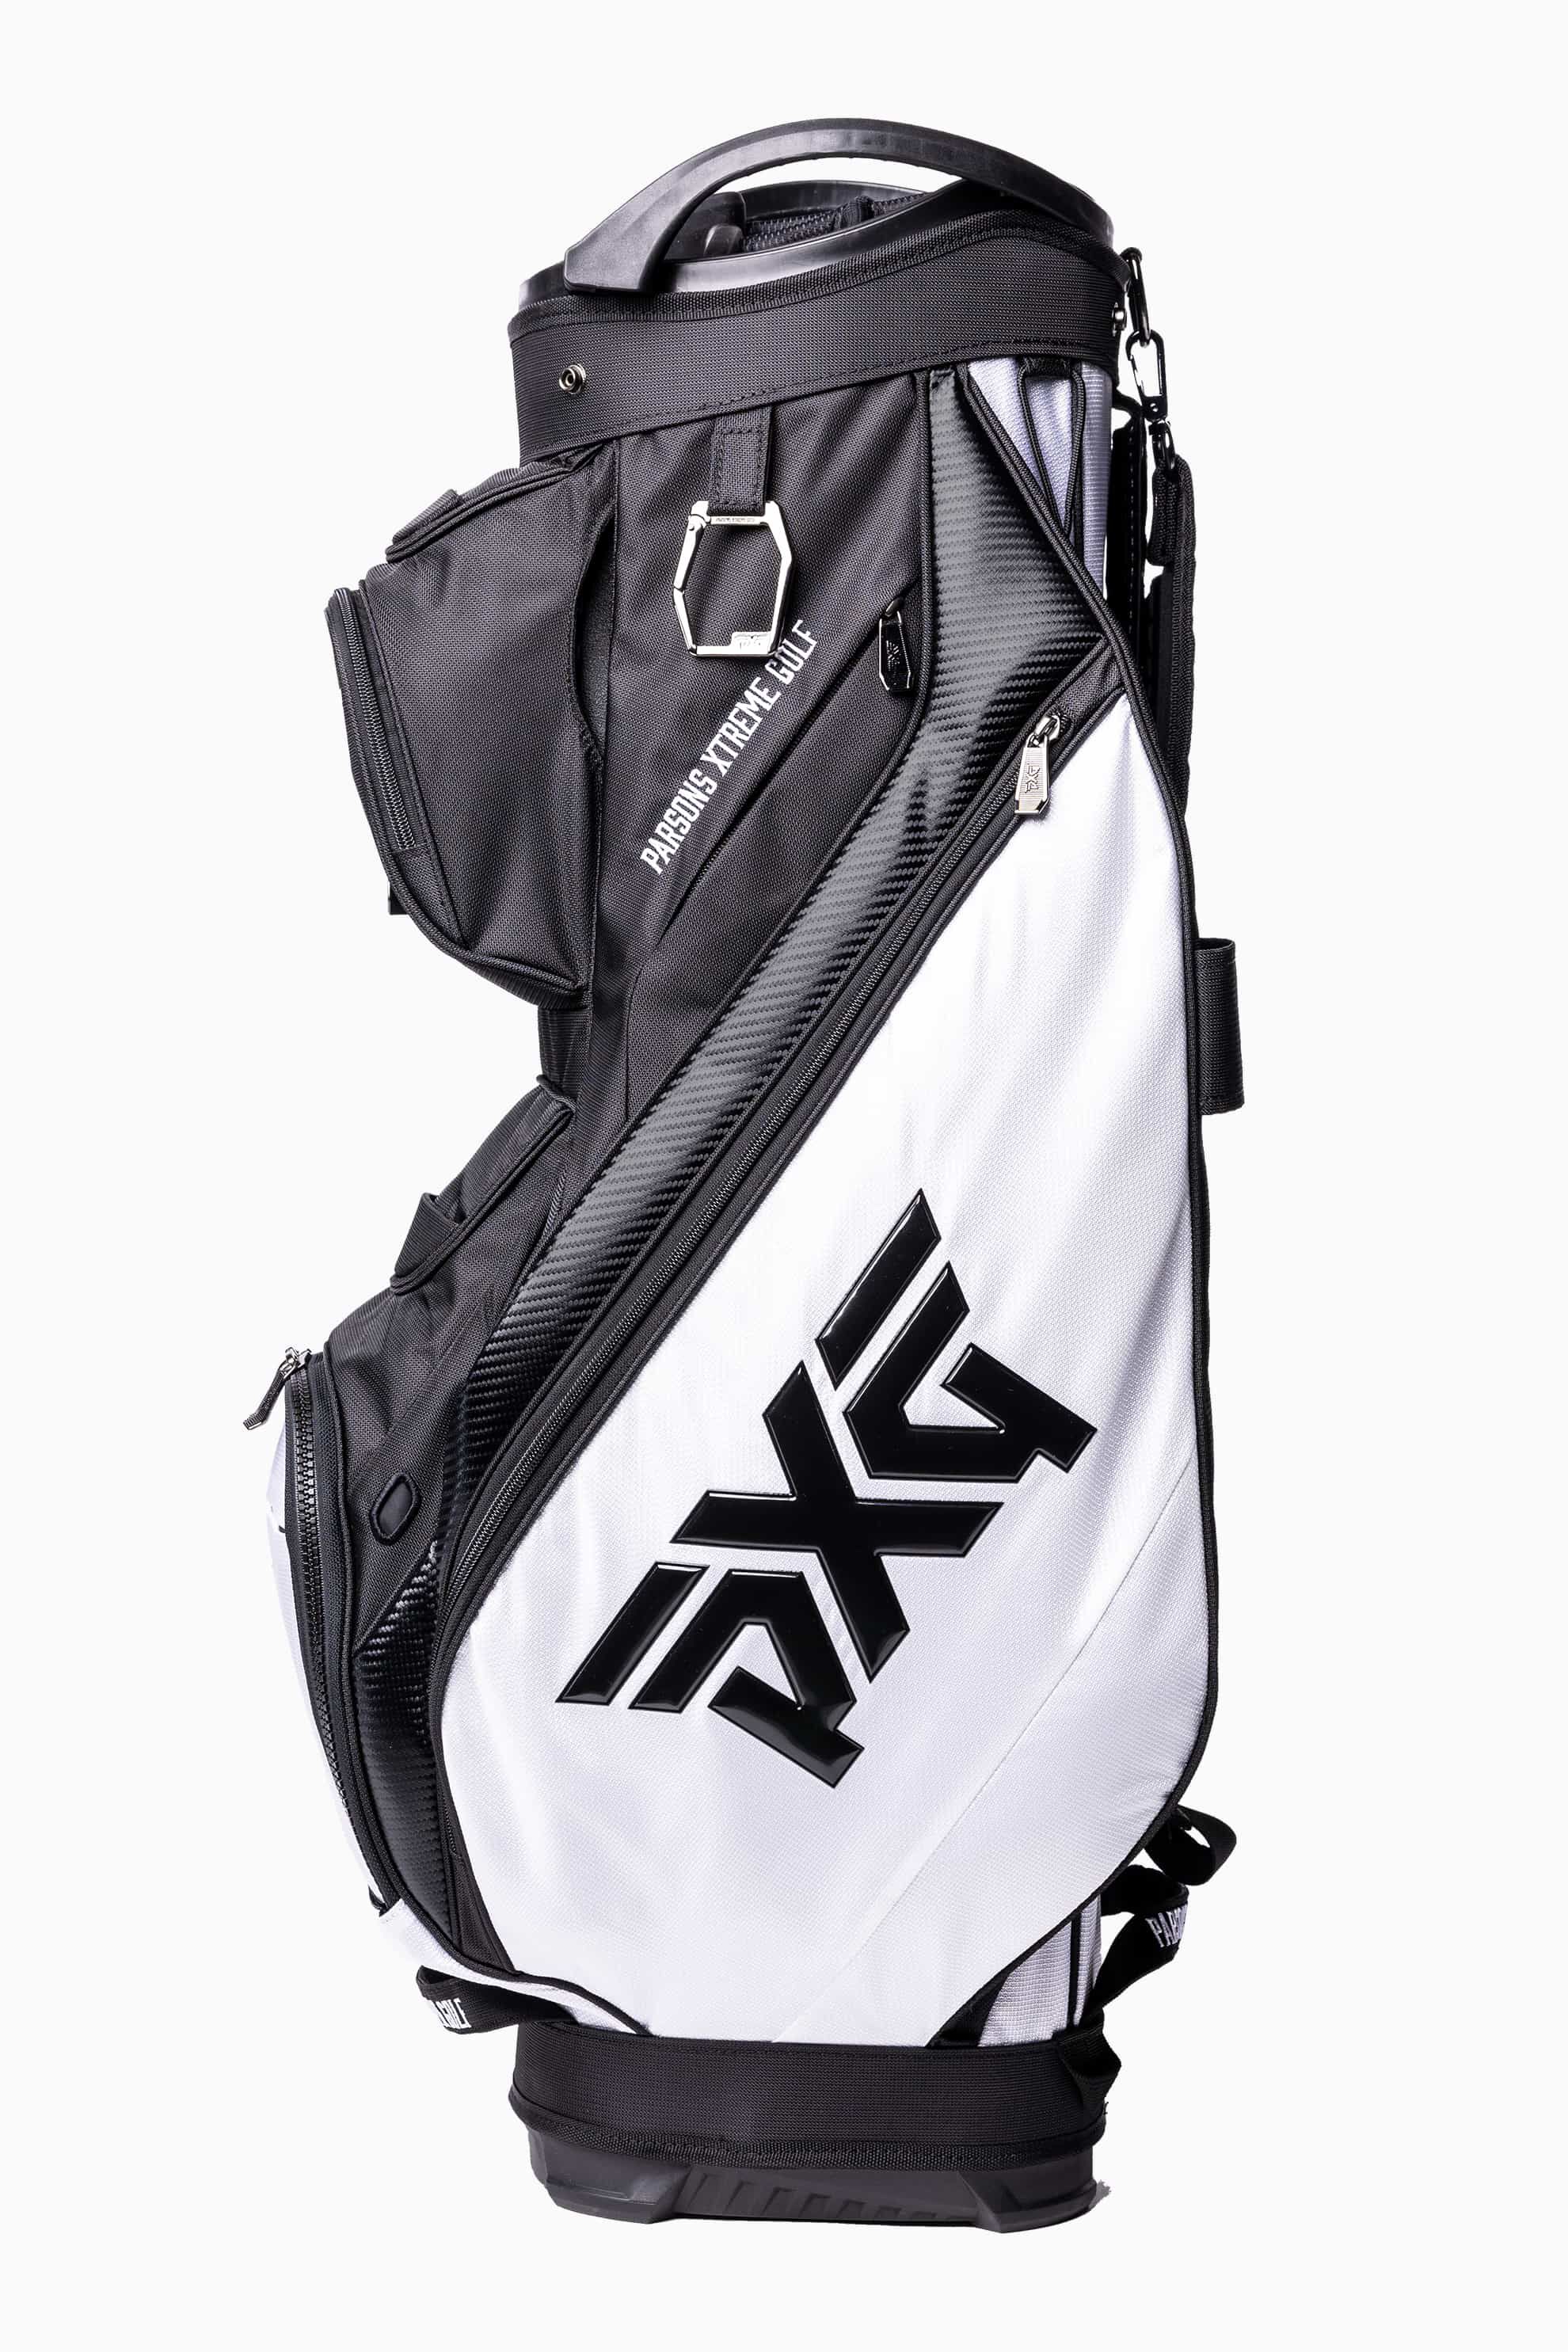 Fore All X Ghost Golf Bag – foreall.com